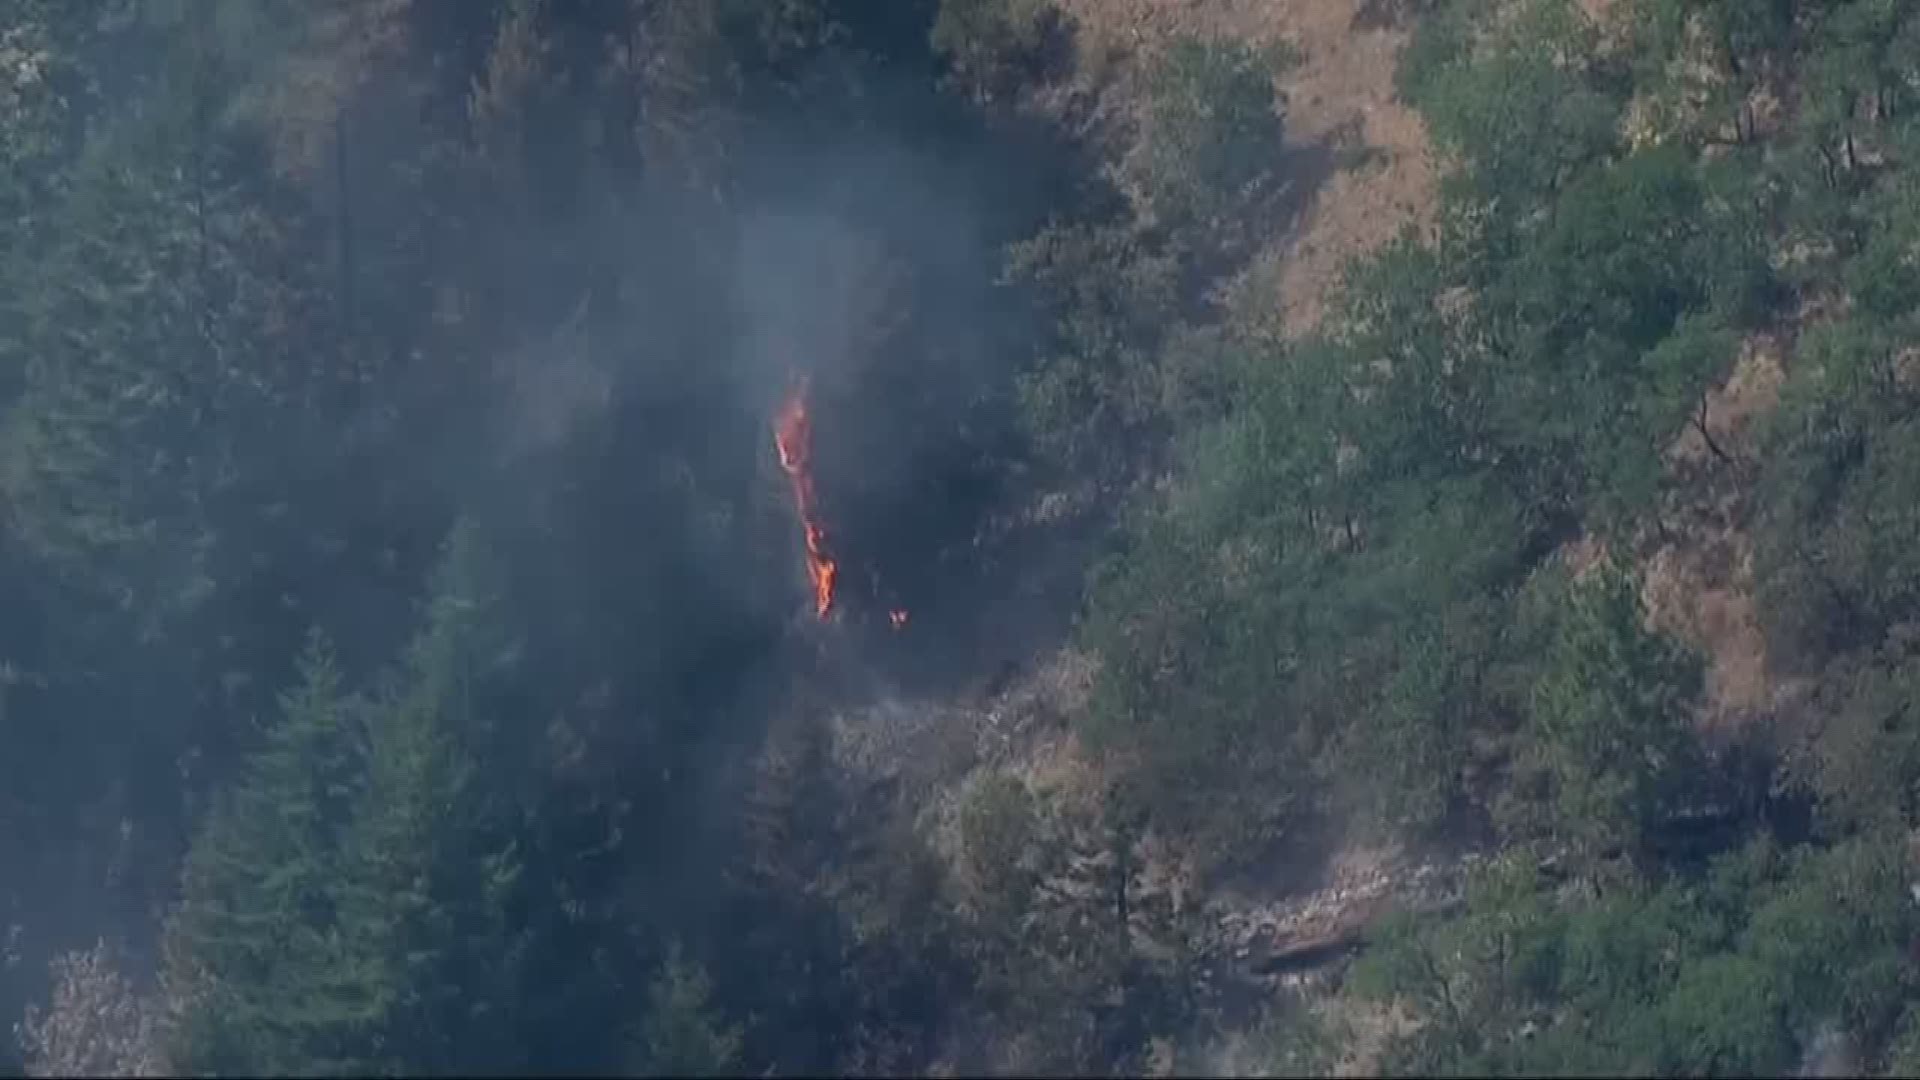 Hiking trails closed due to wildfire